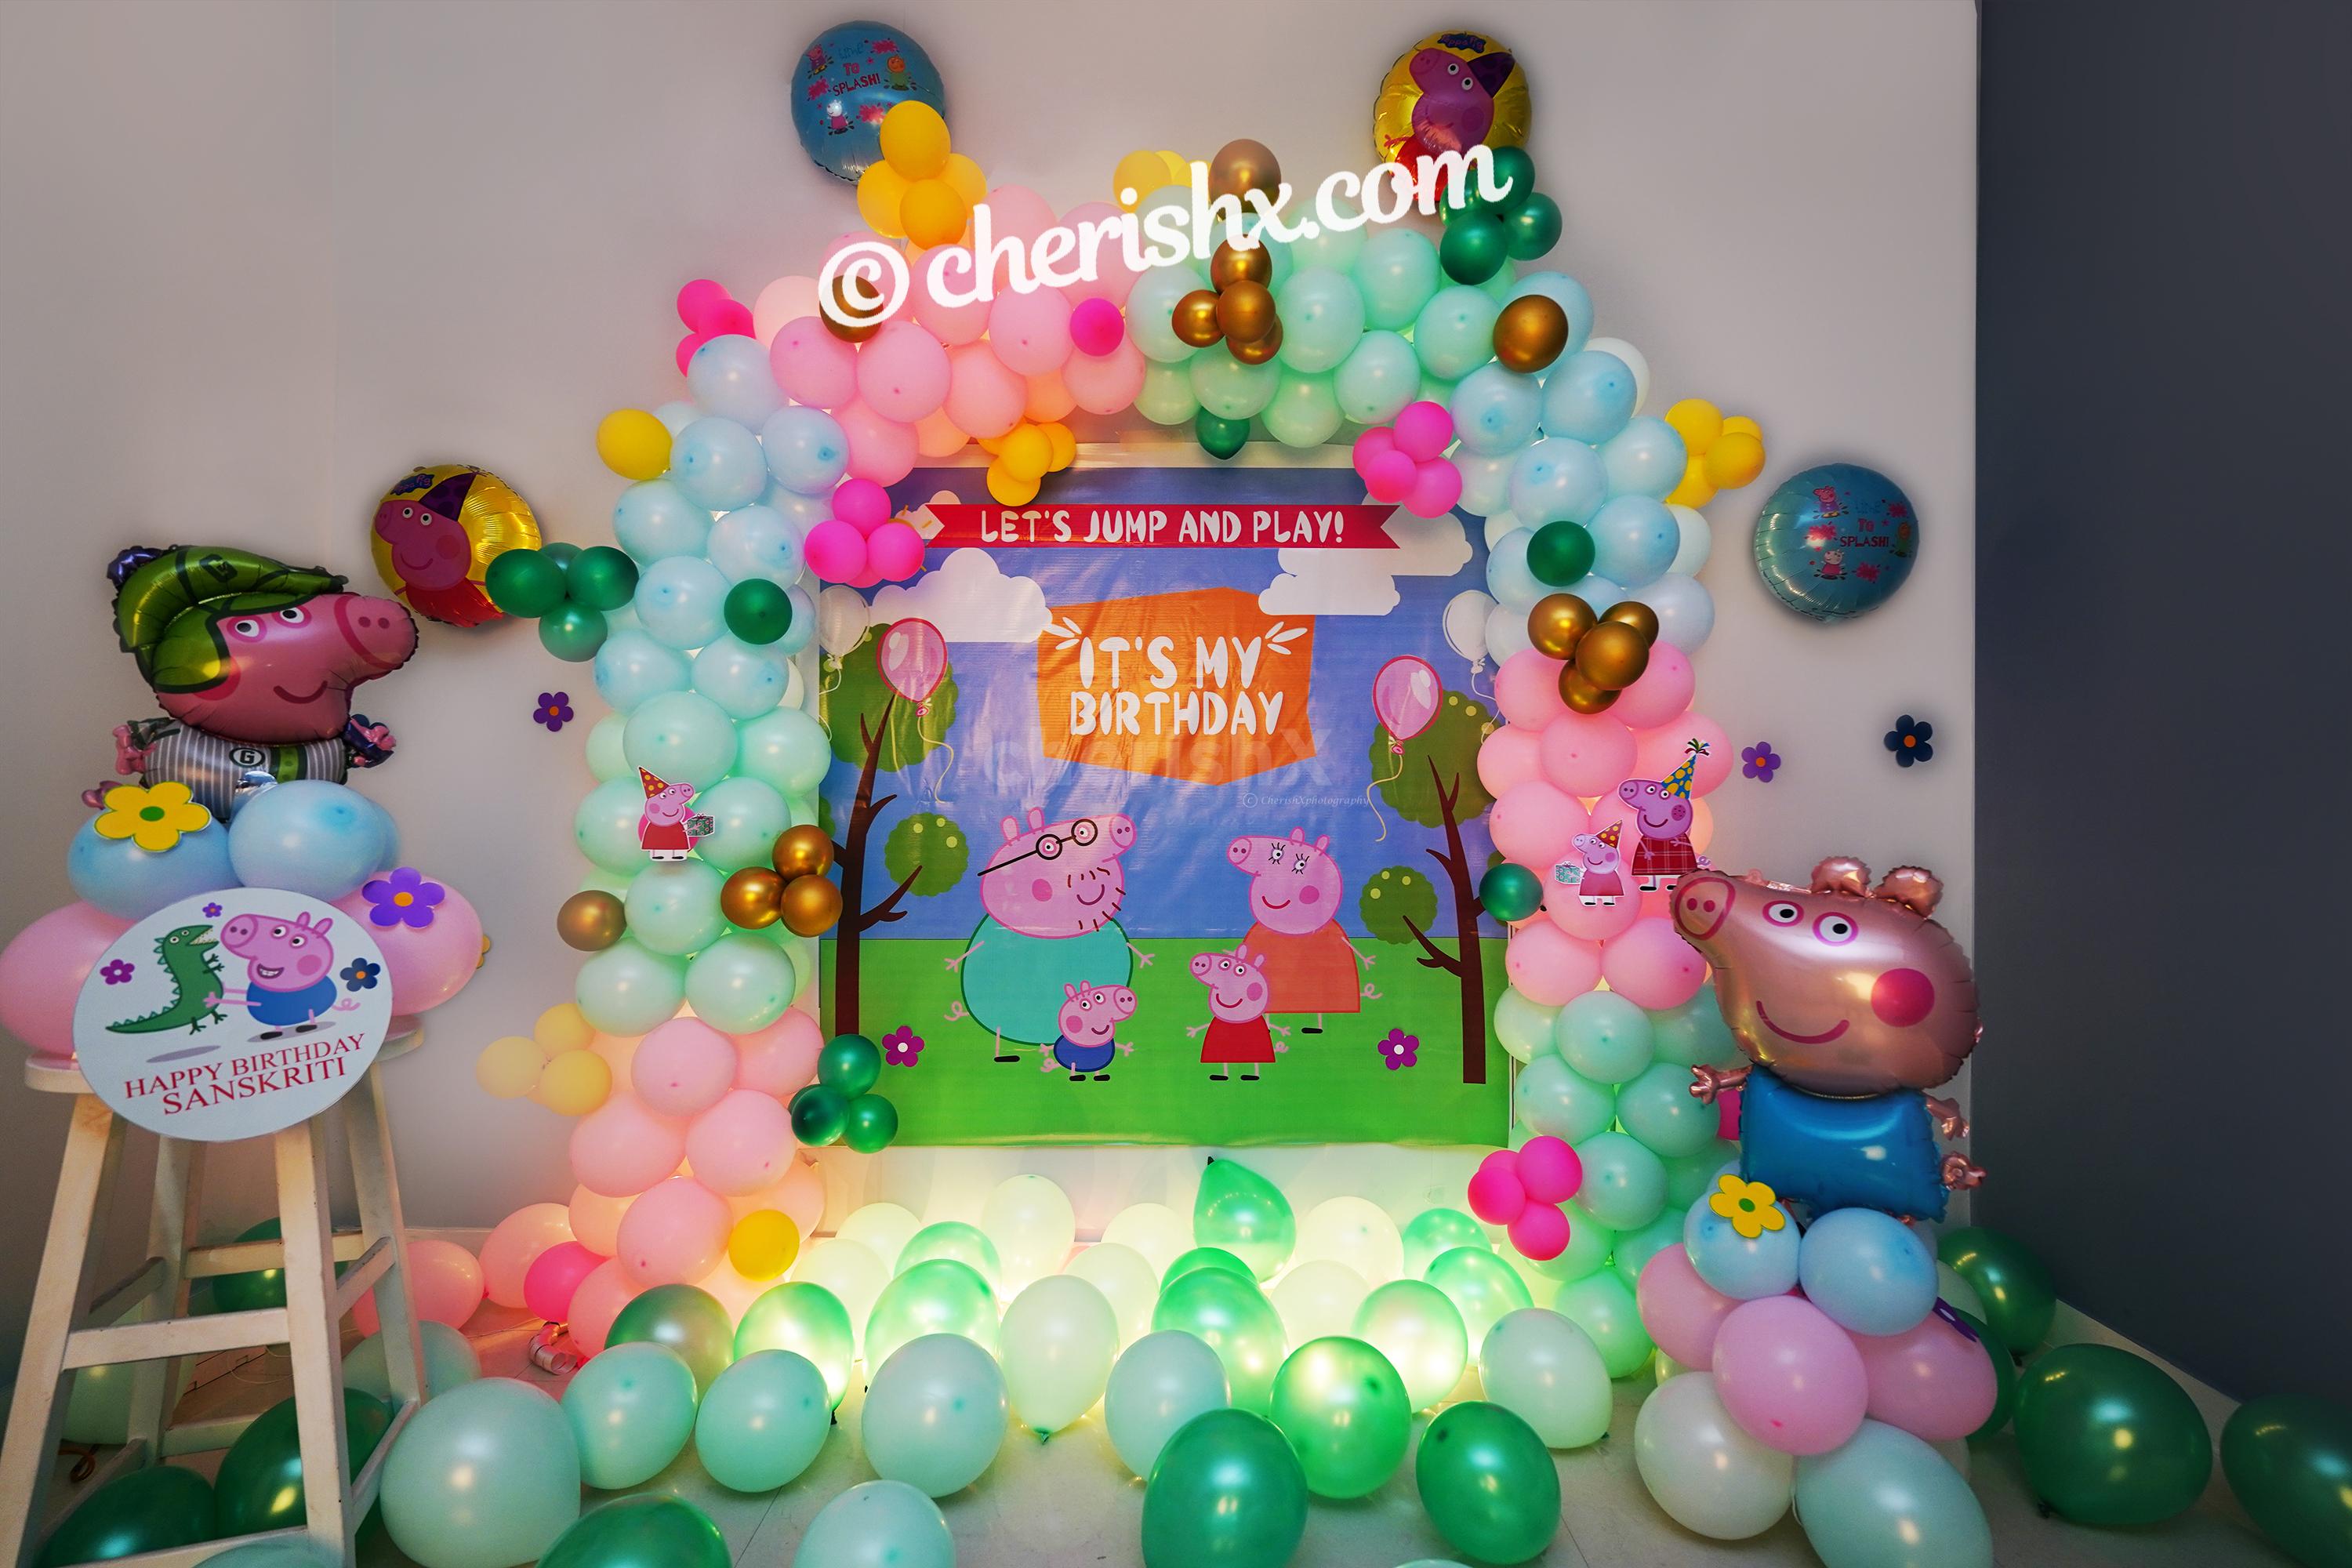 Book an eye appealing decor for your child's birthday